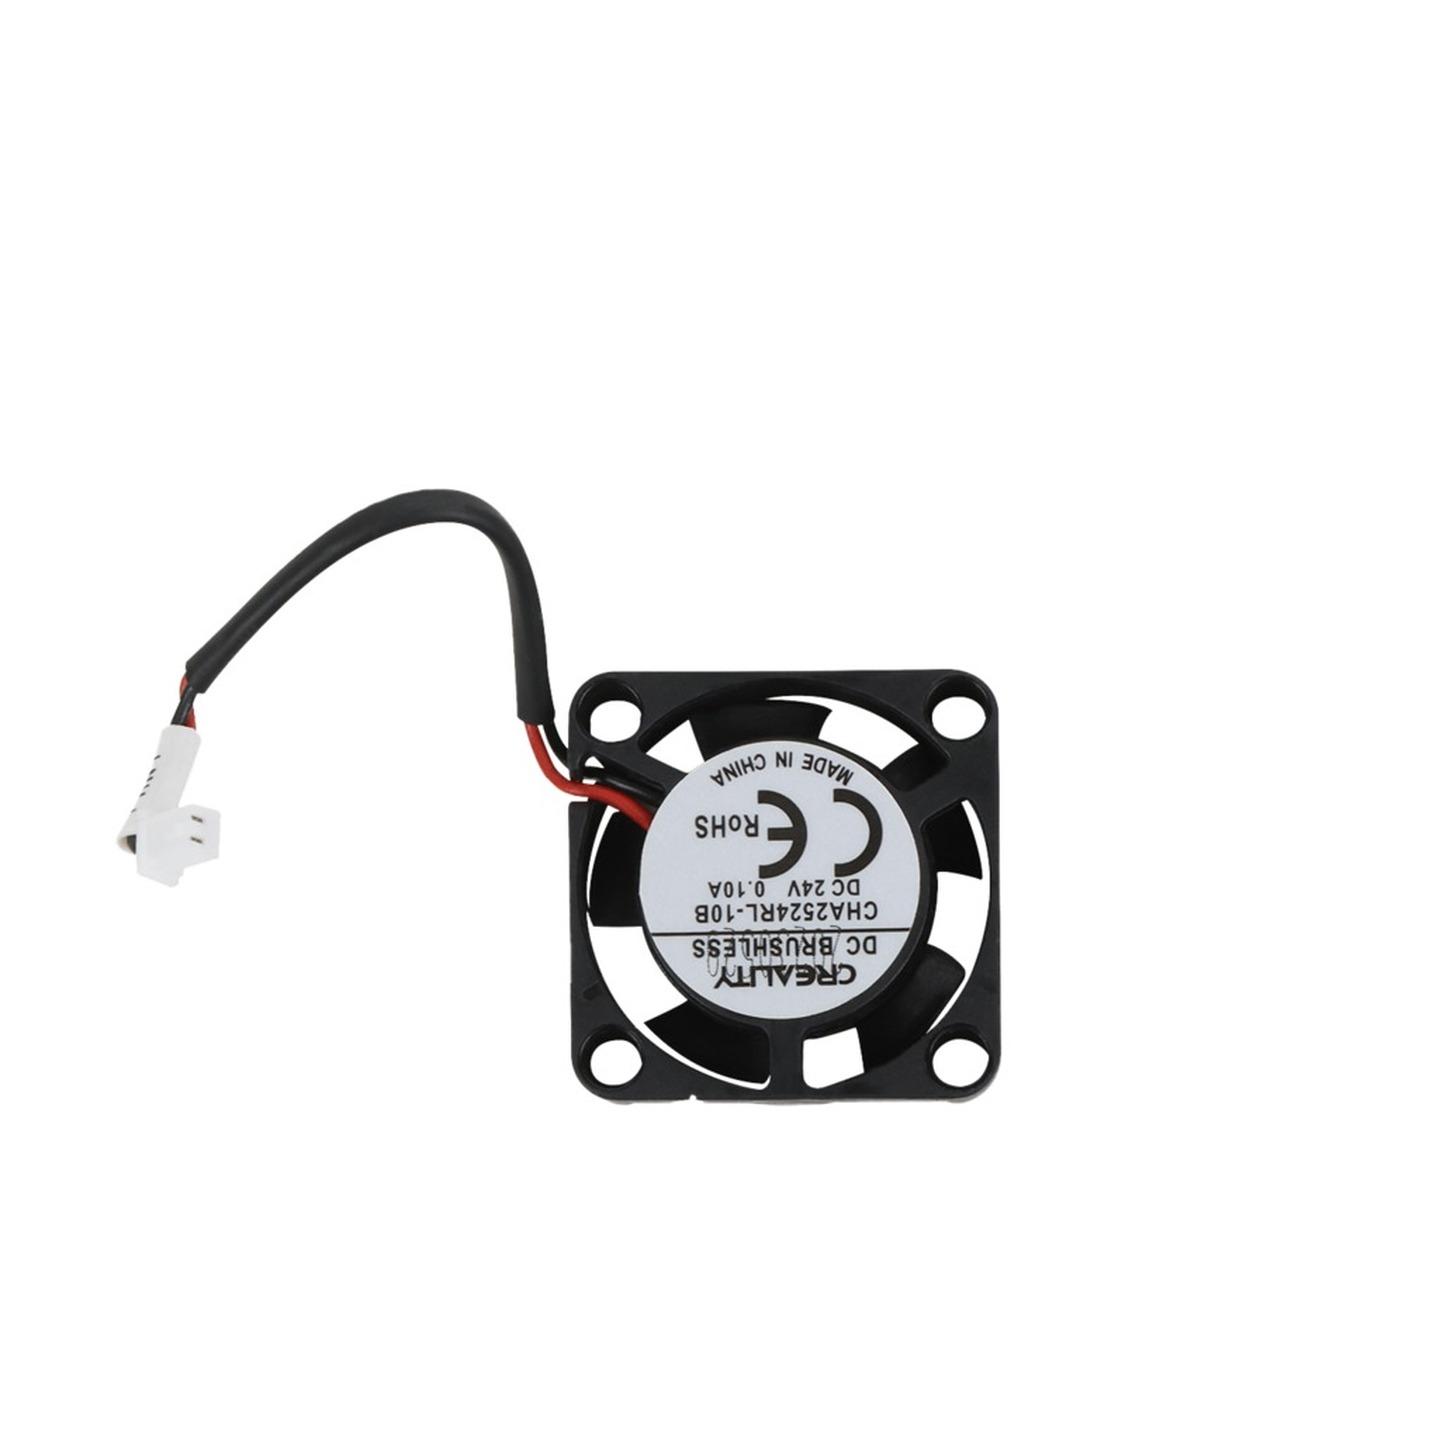 Spare Axial Fan Hydraulic for Ender-3 V3 SE